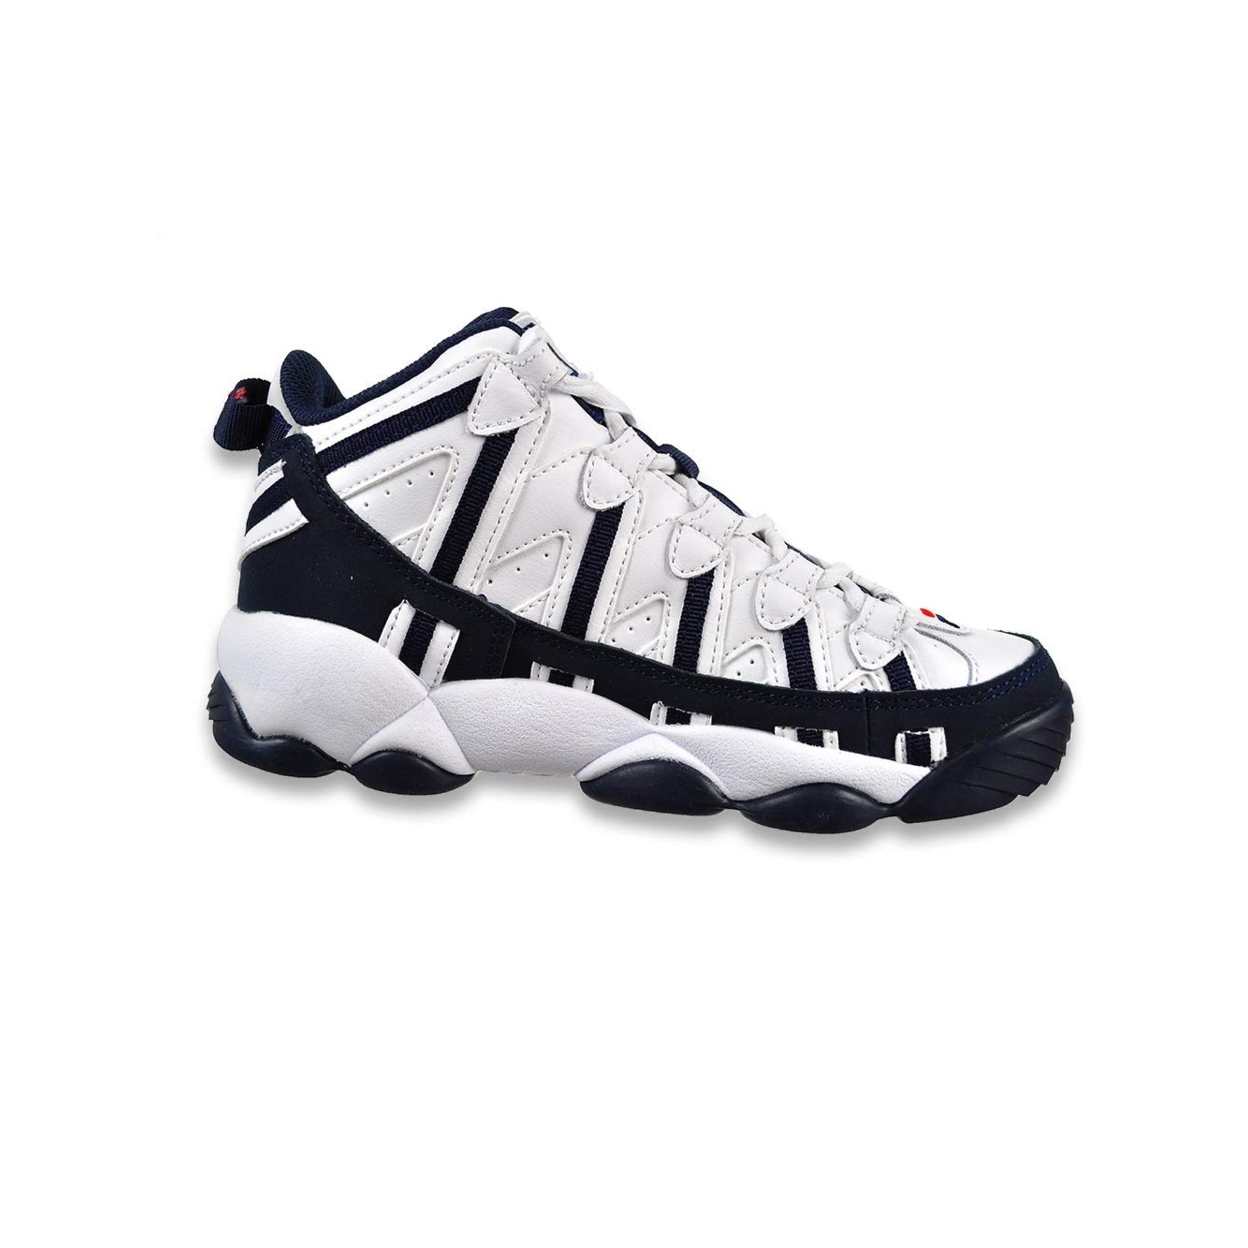 Fila Kids' Stackhouse Spaghetti Basketball Sneakers WHT/FNVY/FRED - WHT/FNVY/FRED, 3.5 Big Kid